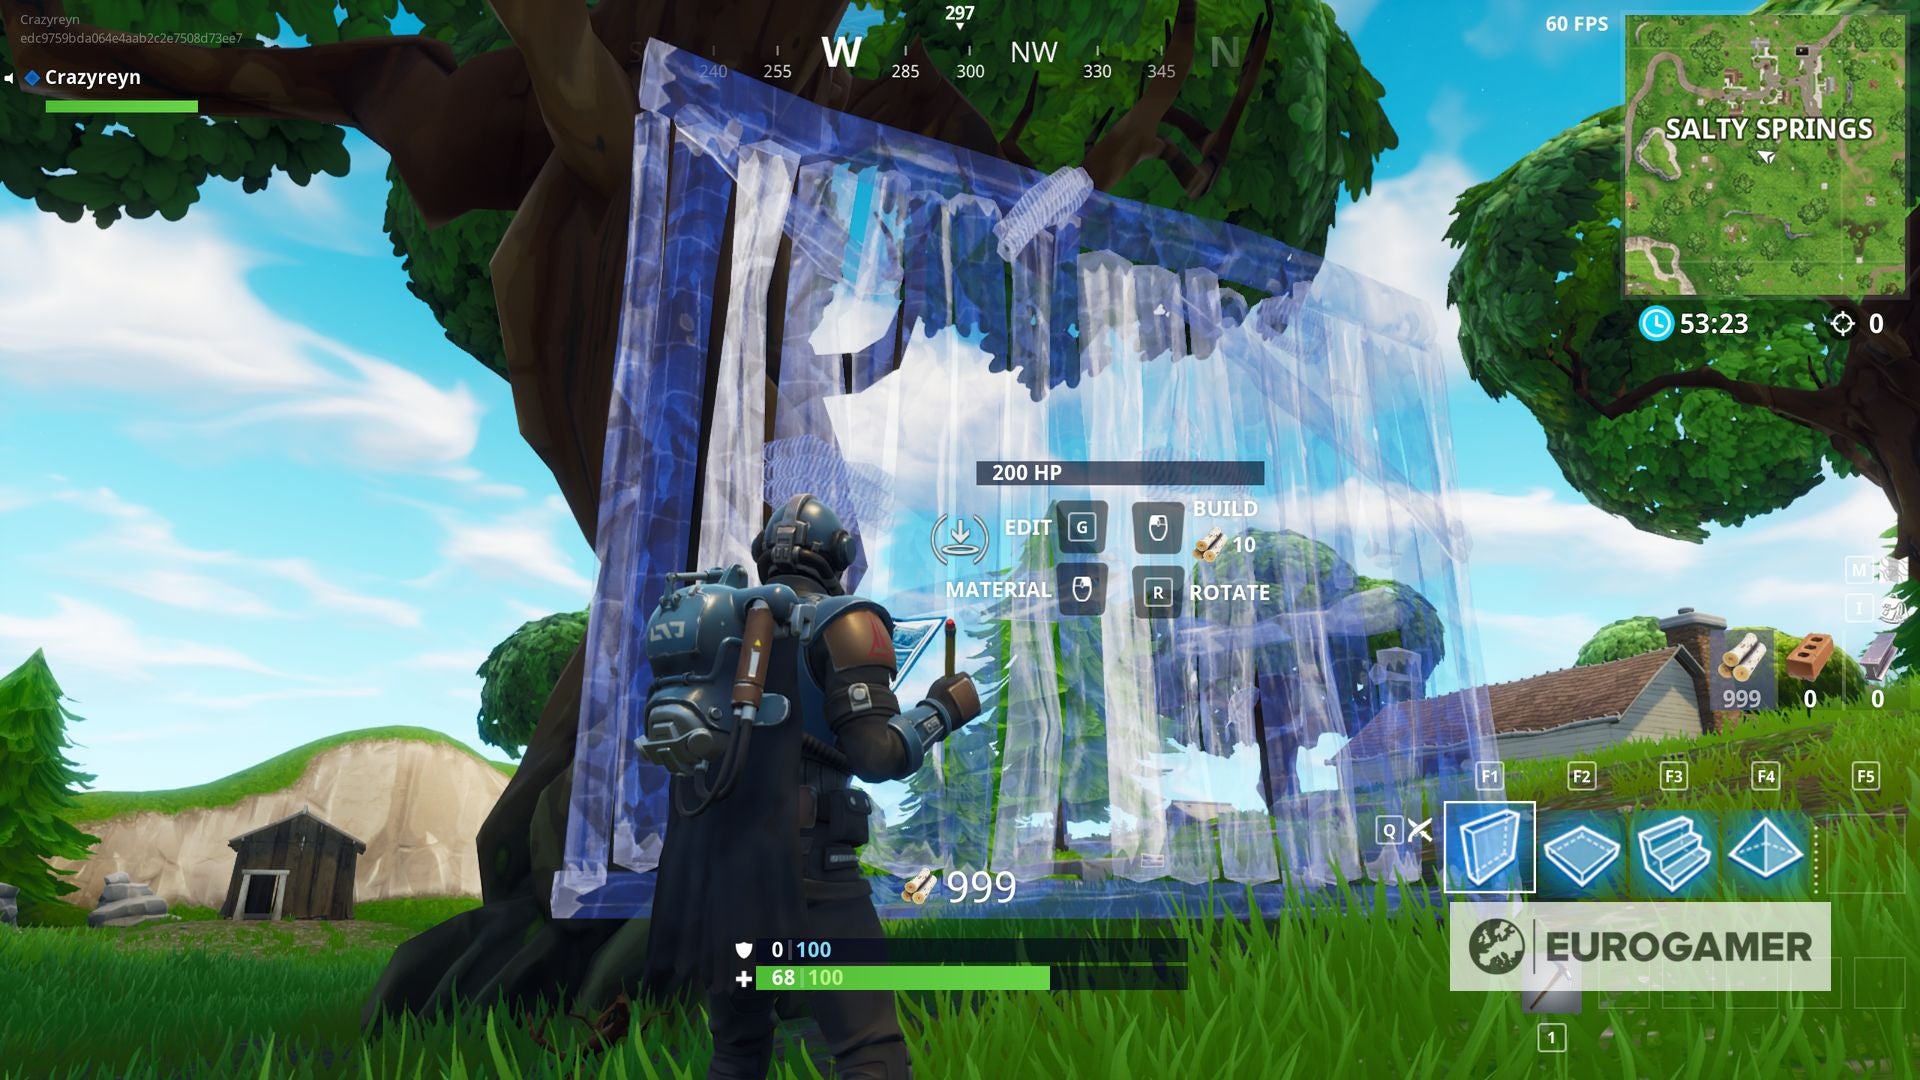 Fortnite building guide: How to build with materials and traps in 